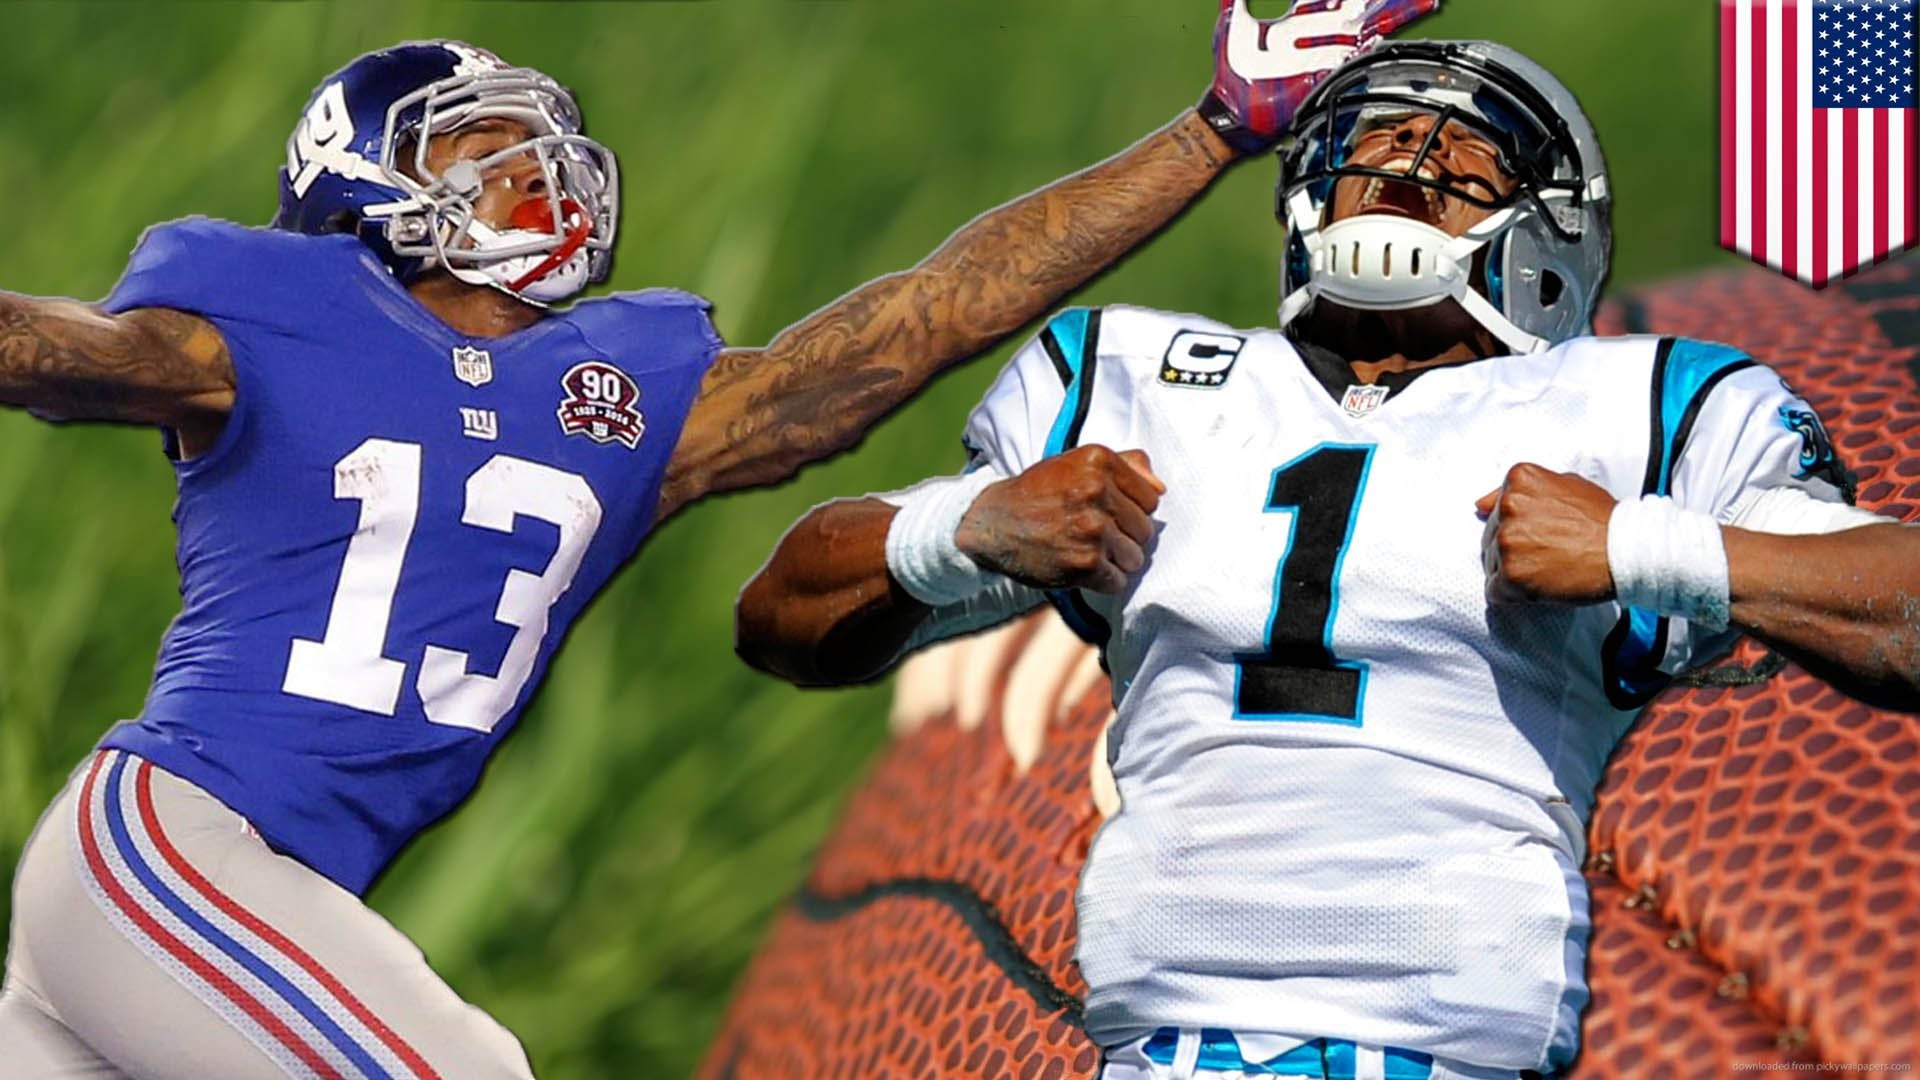 1920x1080 Panthers vs Giants: Cam Newton takes Carolina to face Odell Beckham Jr. and  New York